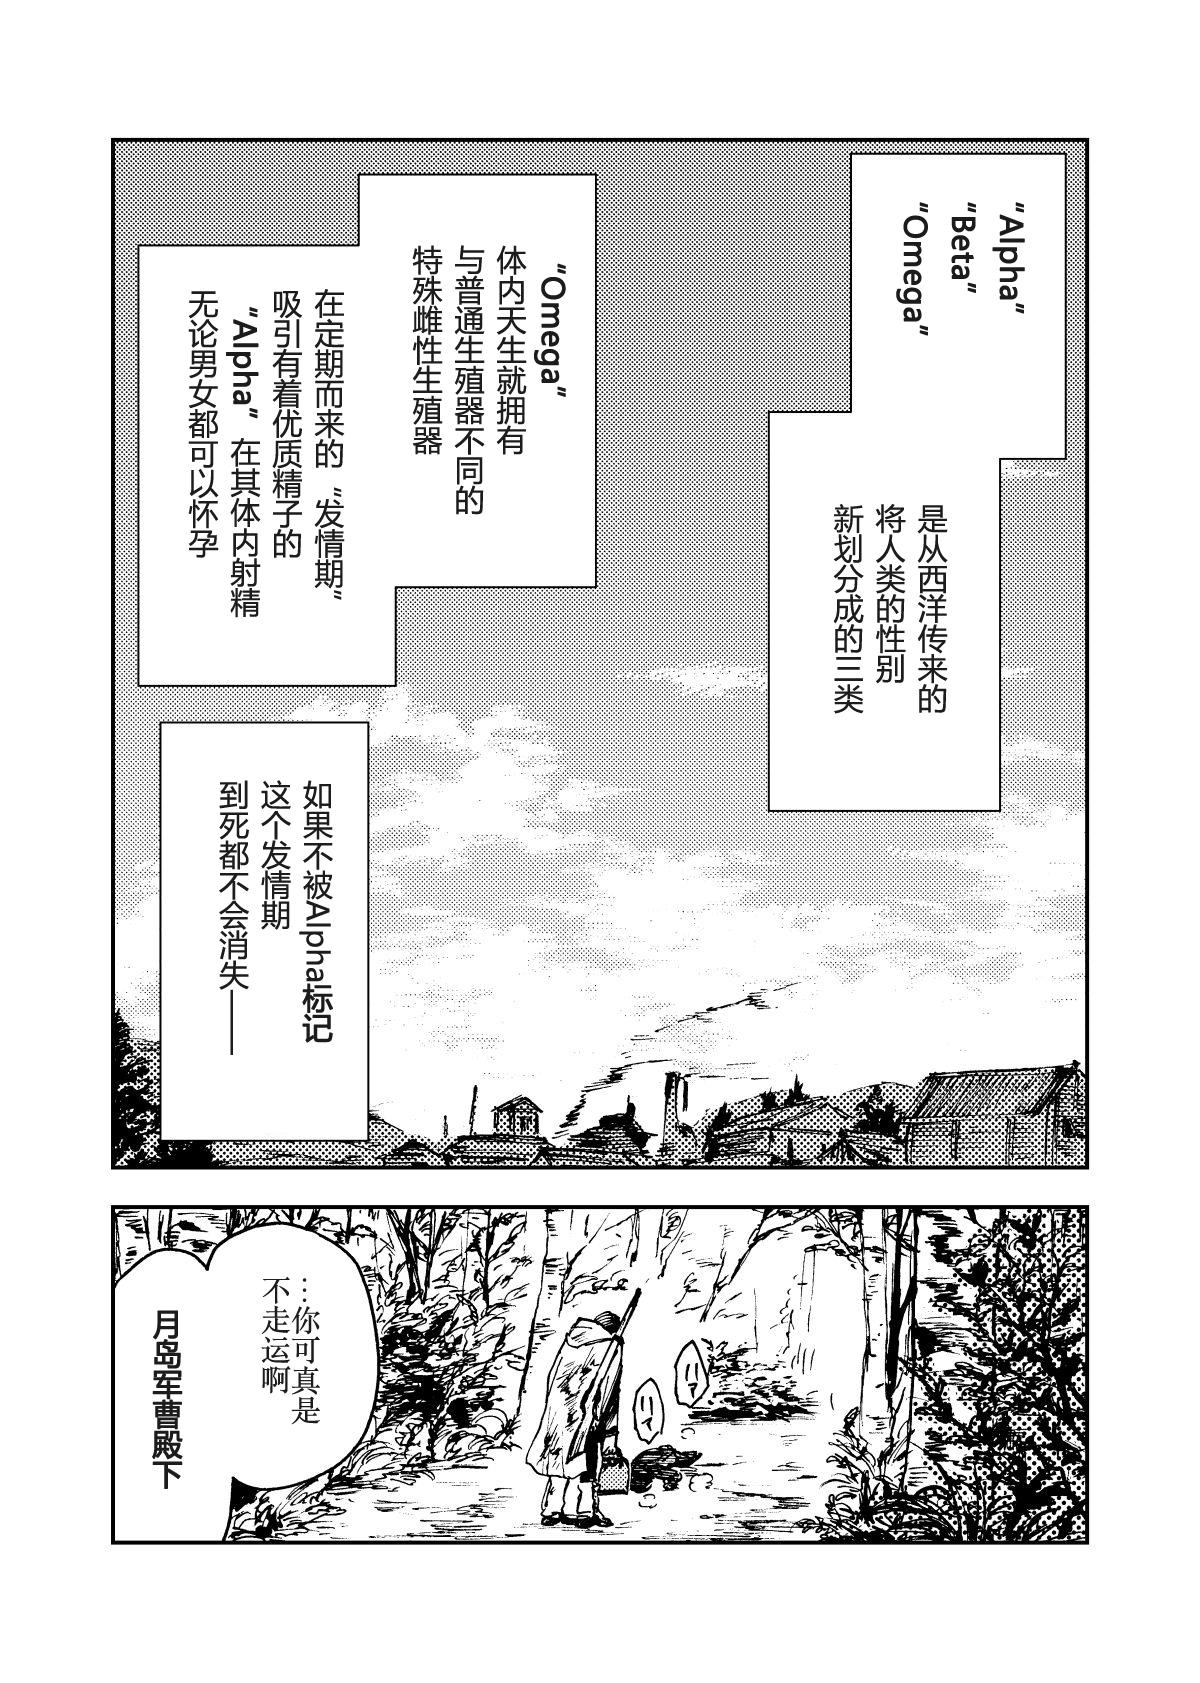 Stripping （自汉化）啸猫弄月（Chinese） - Golden kamuy Shoes - Page 2